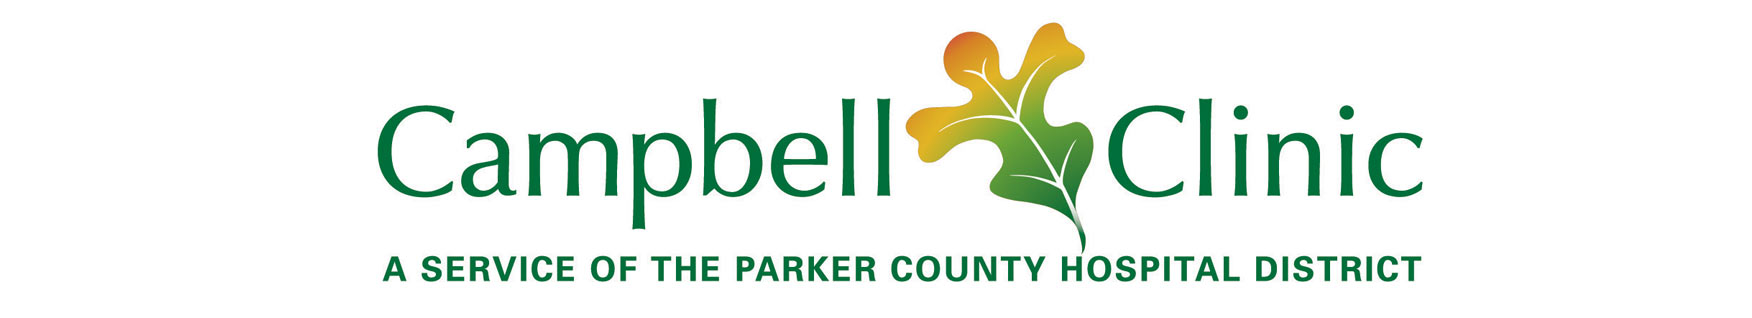 Campbell Clinic
A SERVICE OF THE PARKER COUNTY HOSPITAL DISTRICT